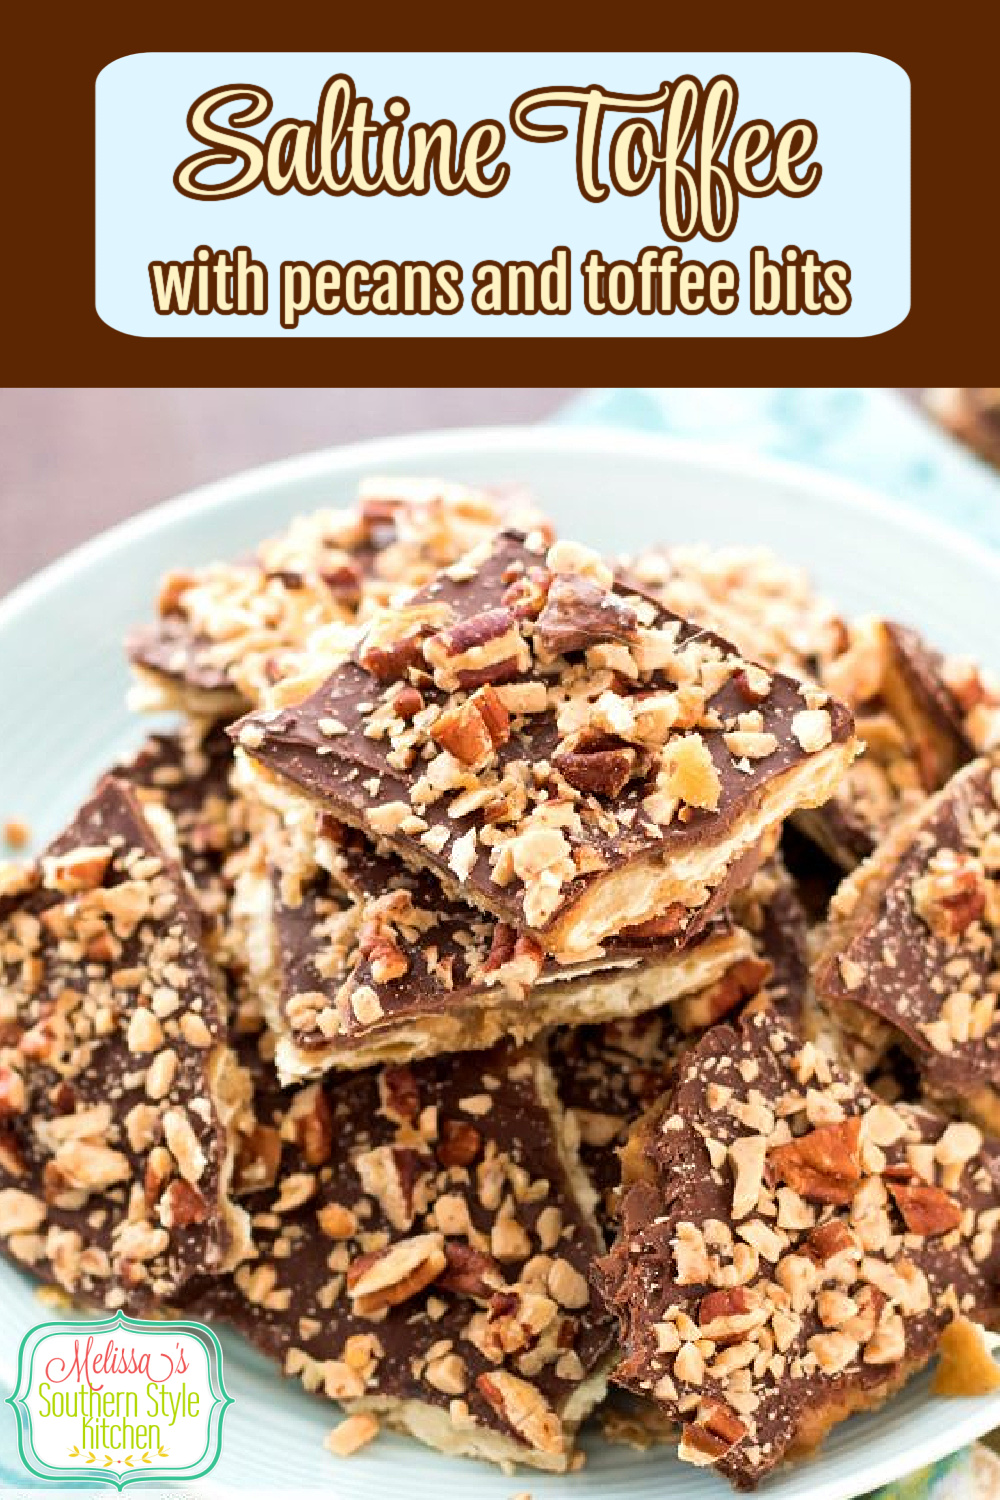 This buttery Saltine Toffee with Pecans and Toffee Bits features crackers smothered with homemade toffee then topped with melted chocolate. It's positively addictive! #crackertoffee #christmascrack #saltinetoffee #toffee #chocolate #christmascandy #chrismtassrecipes #desserts #dessertfoodrecipes #toffeerecipes